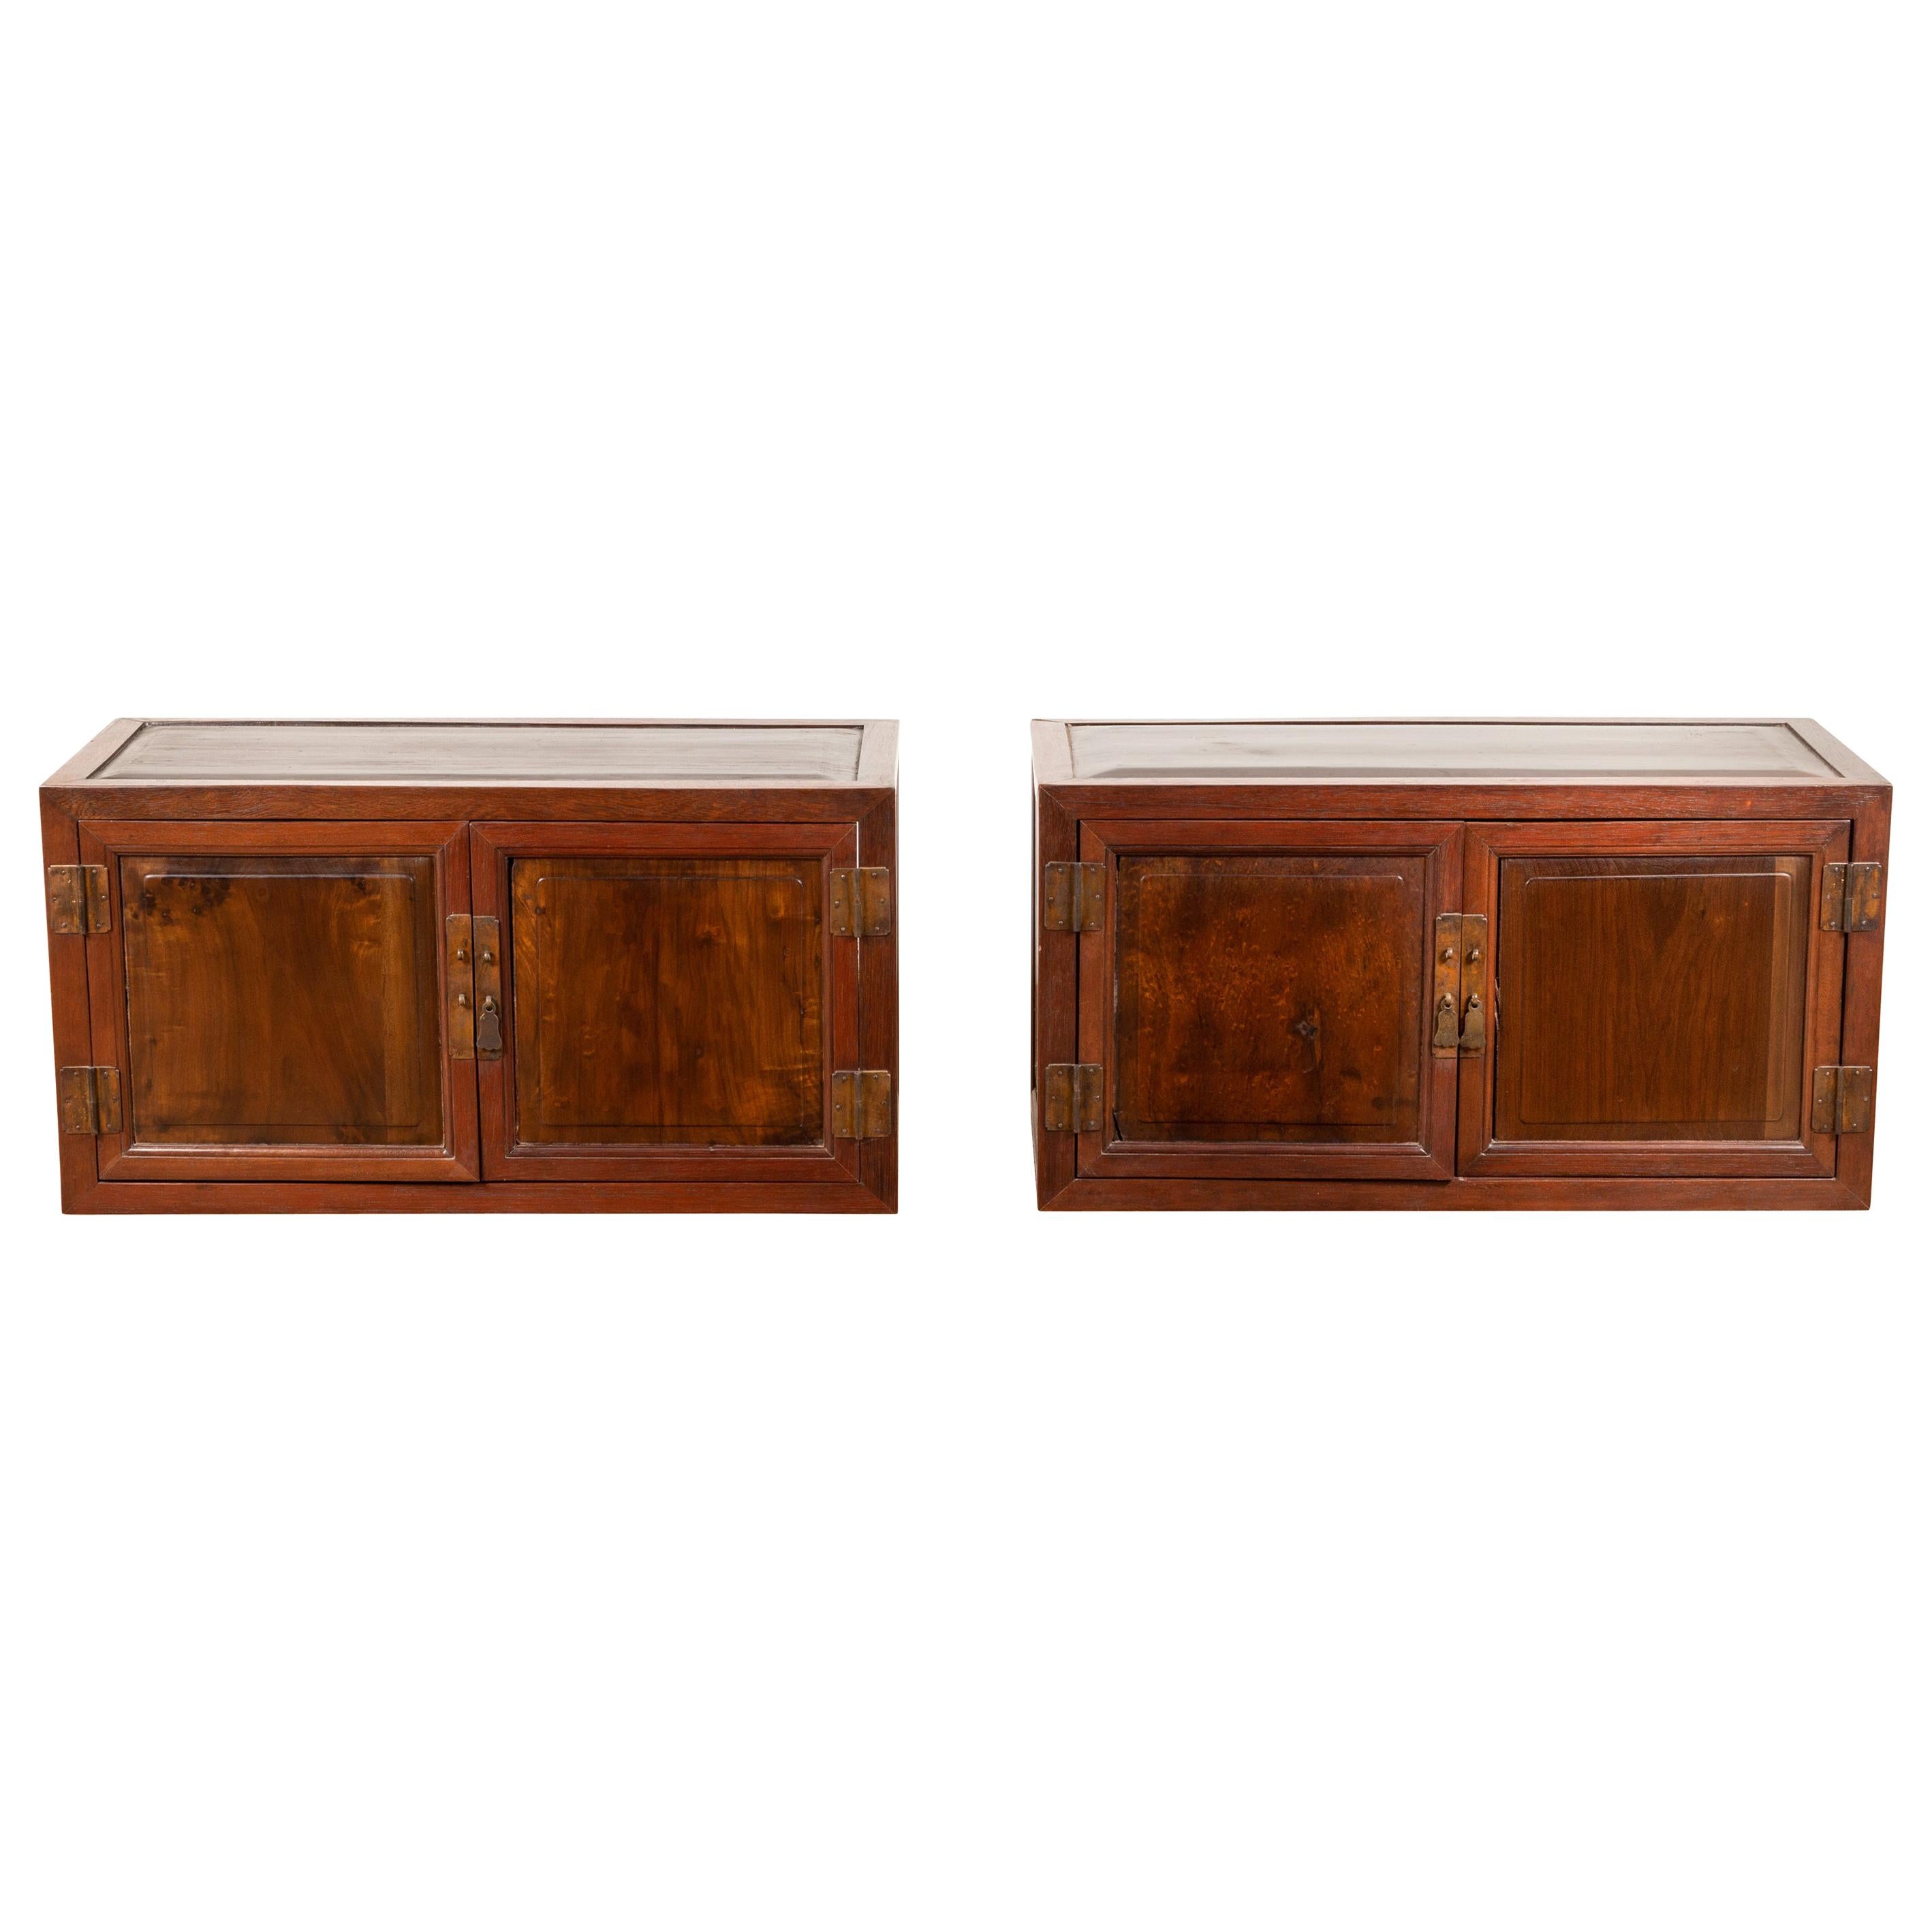 Pair of Chinese Antique Wood Low Cabinets with Brass Hardware and Raised Accents